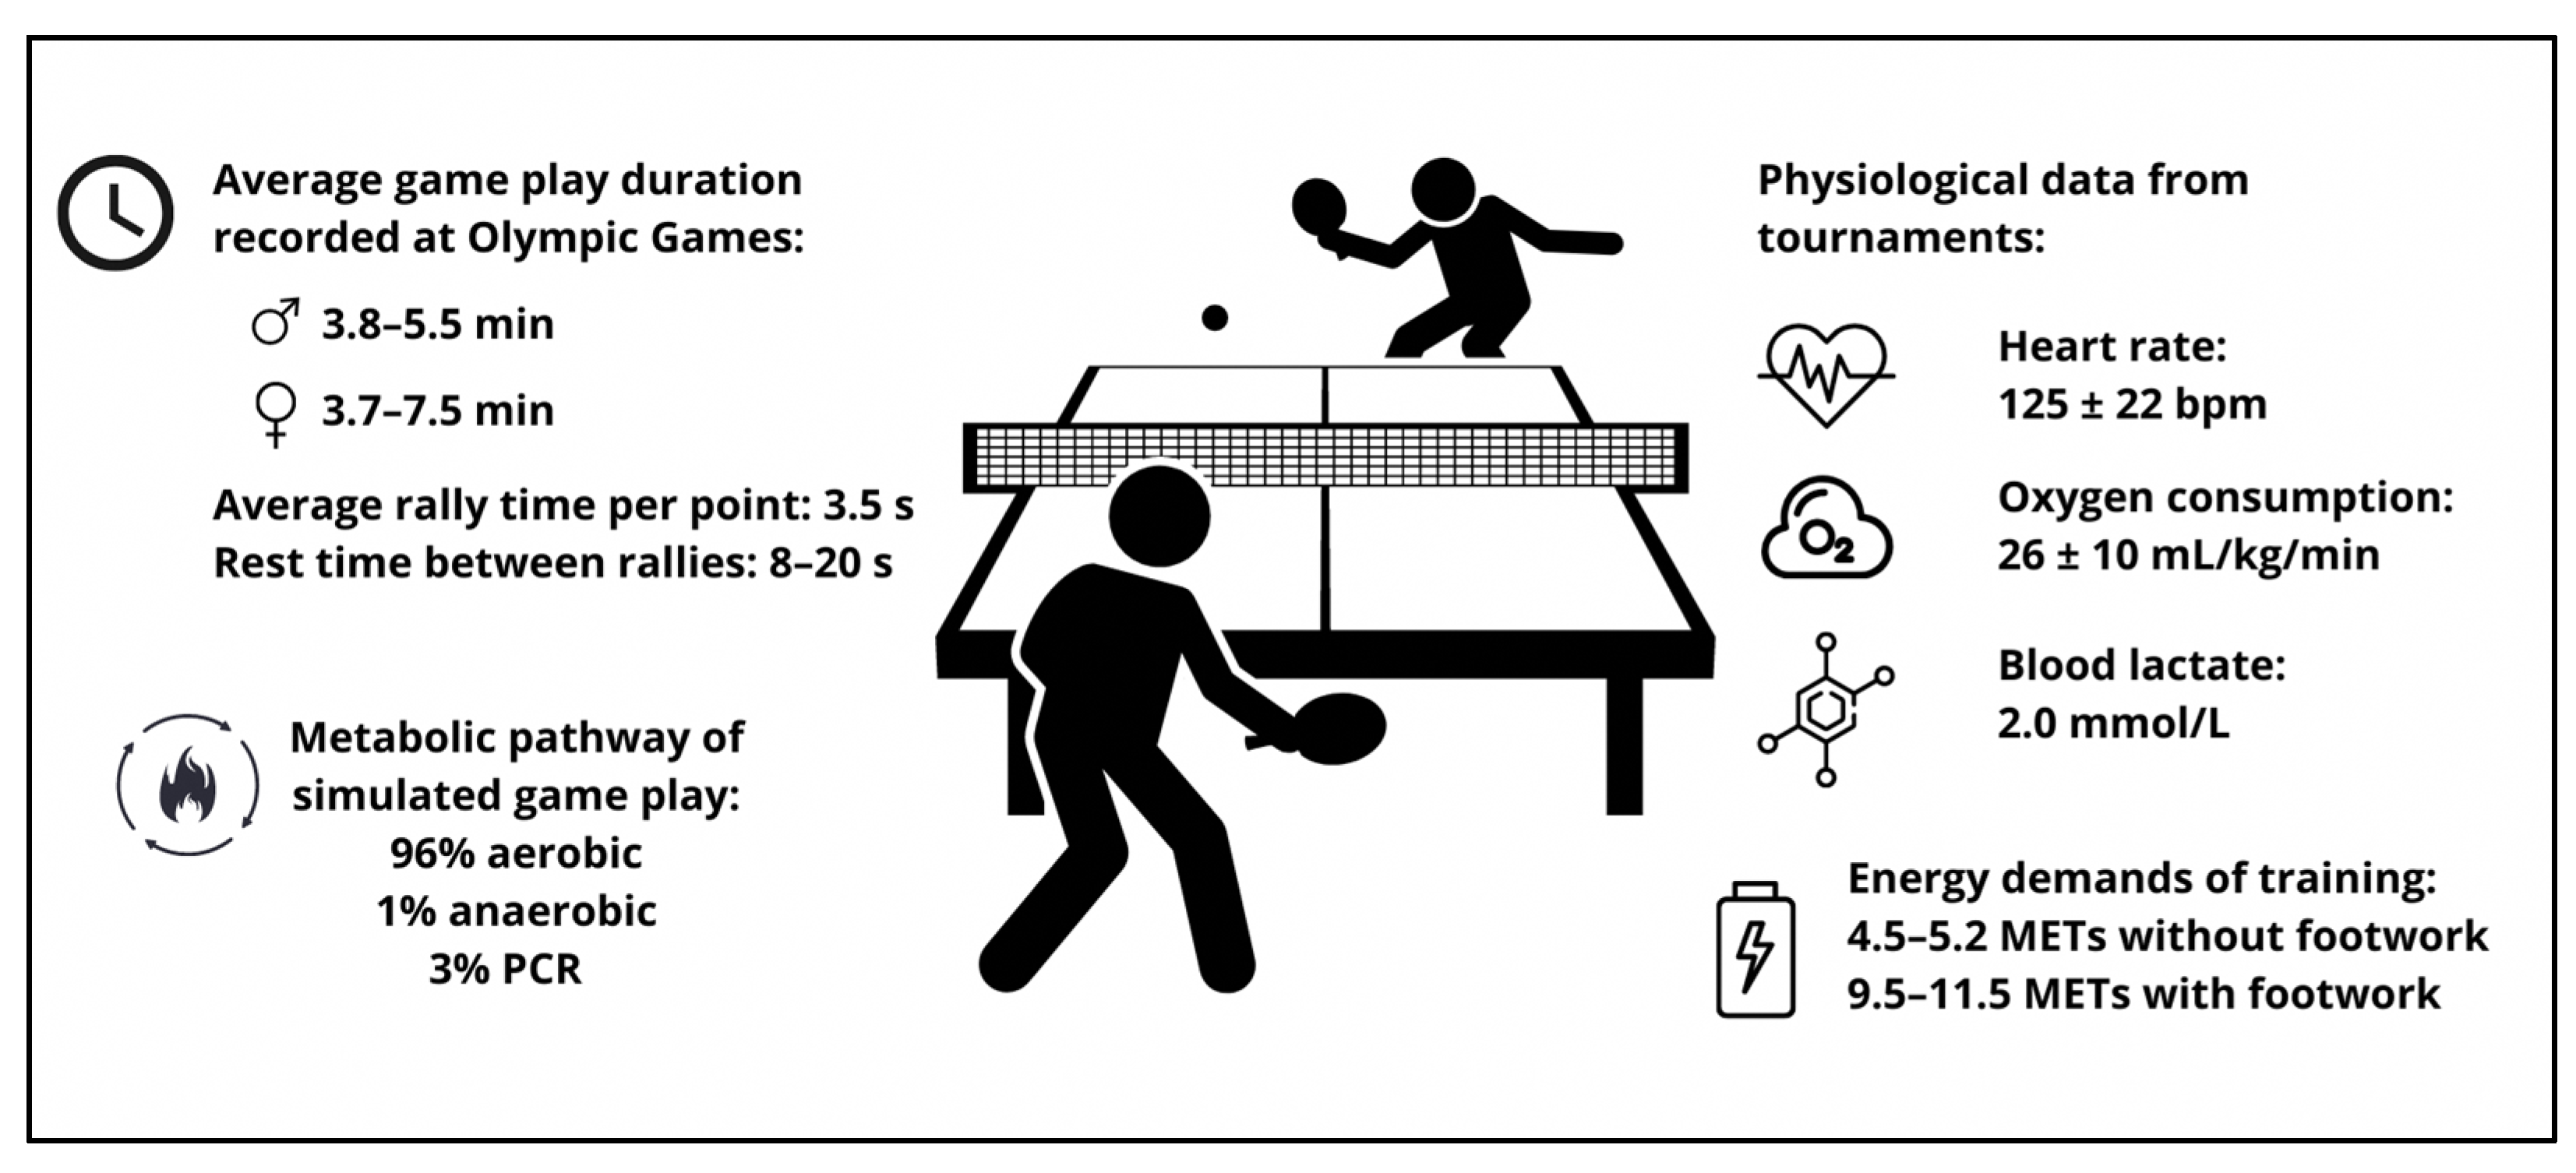 Ping Pong' Recap: 'The Wind Makes It Too Hard to Hear